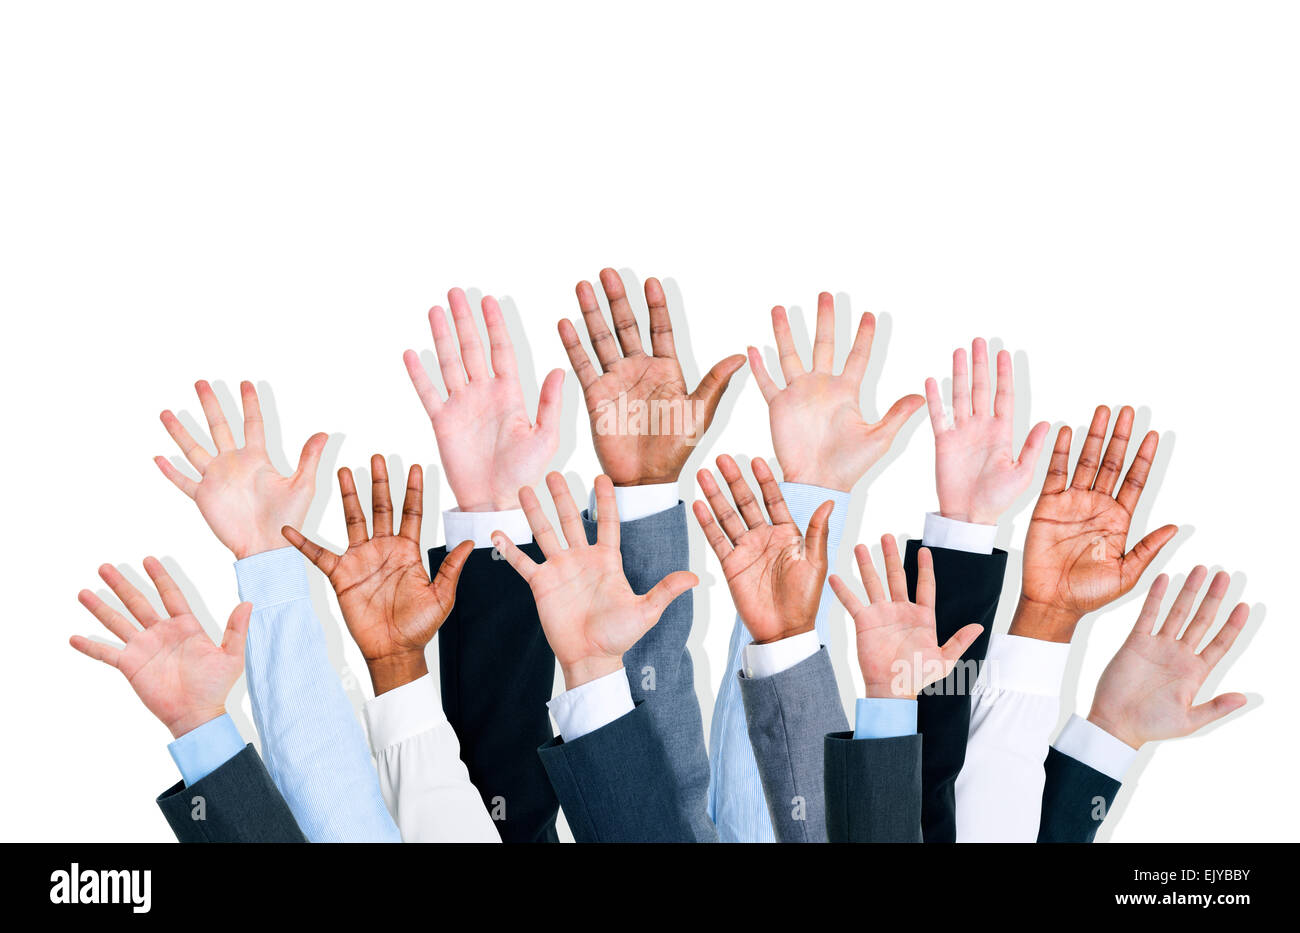 Group of business human arms raised. Stock Photo